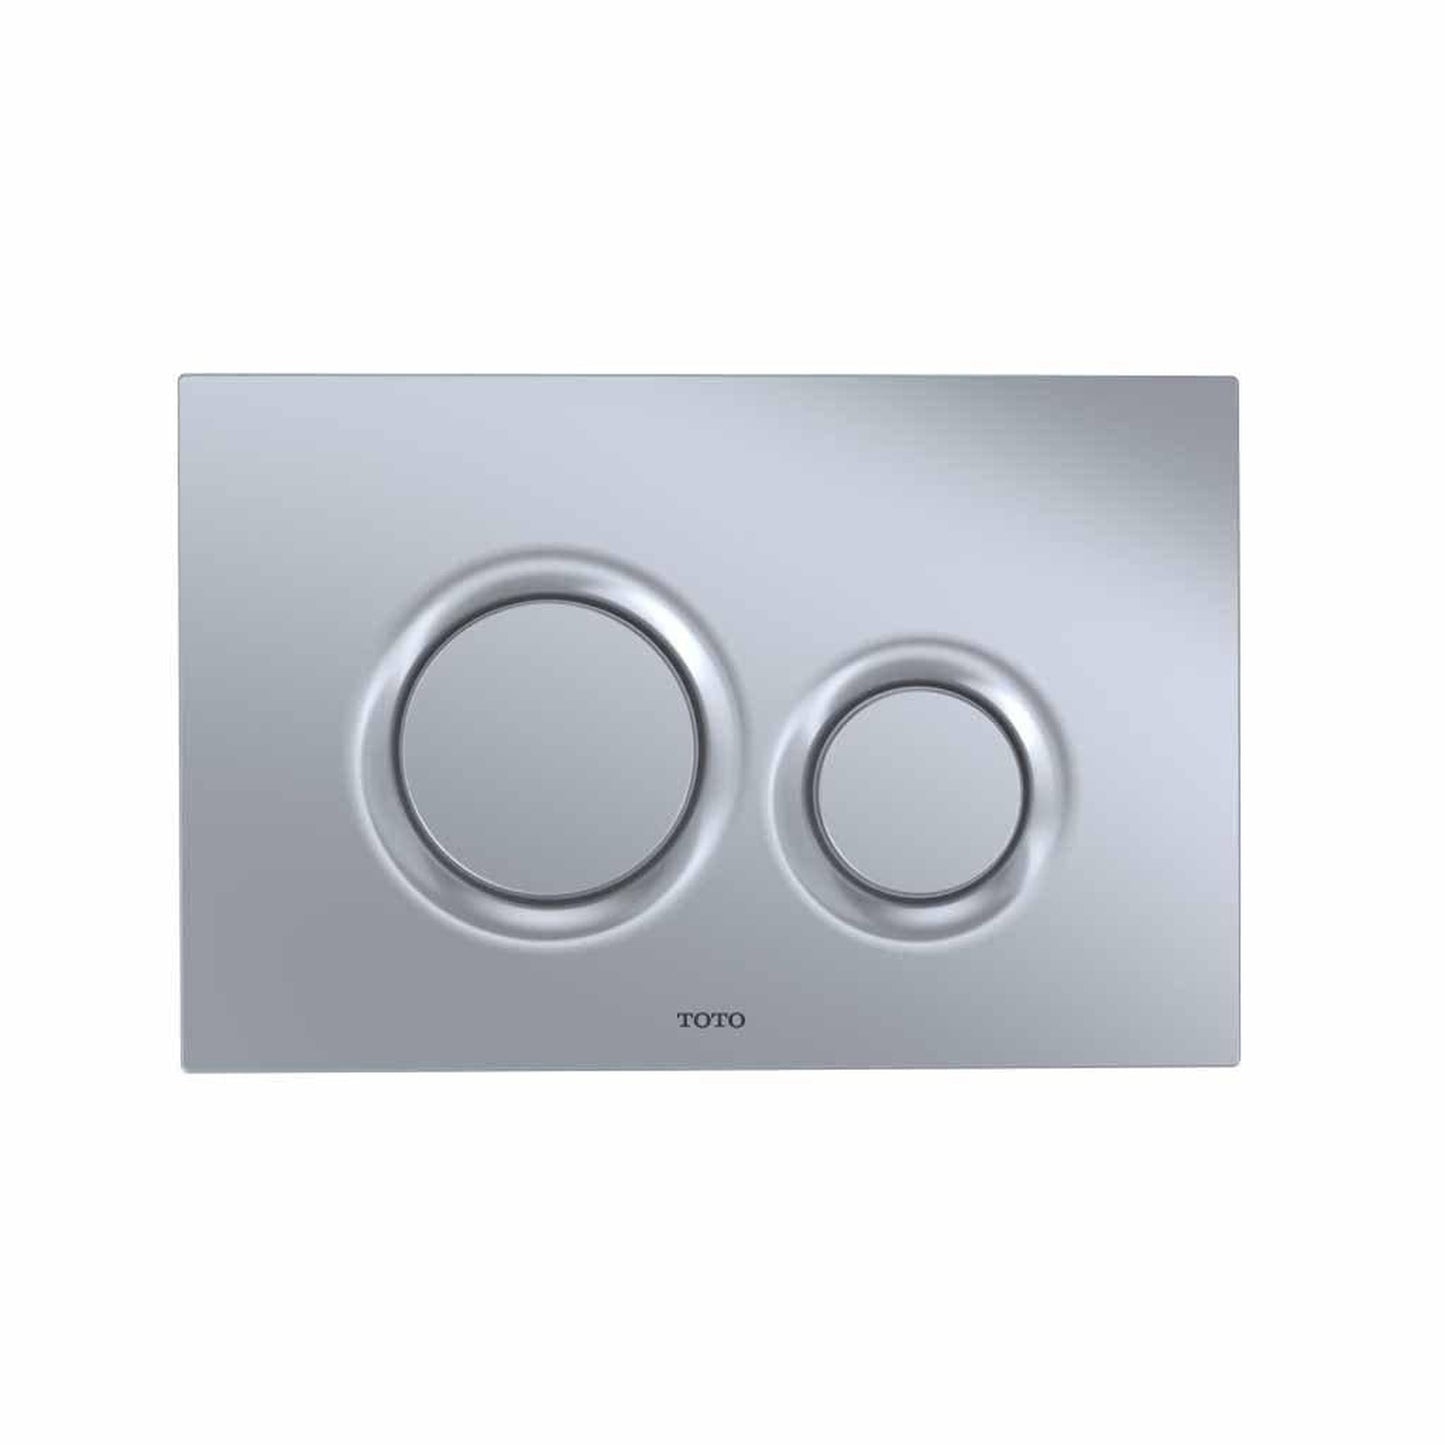 TOTO AP Wall-Hung 1.28 GPF & 0.9 GPF Dual-Flush Elongated Toilet With Duofit In-Wall Tank Unit and Matte Silver Push Plate